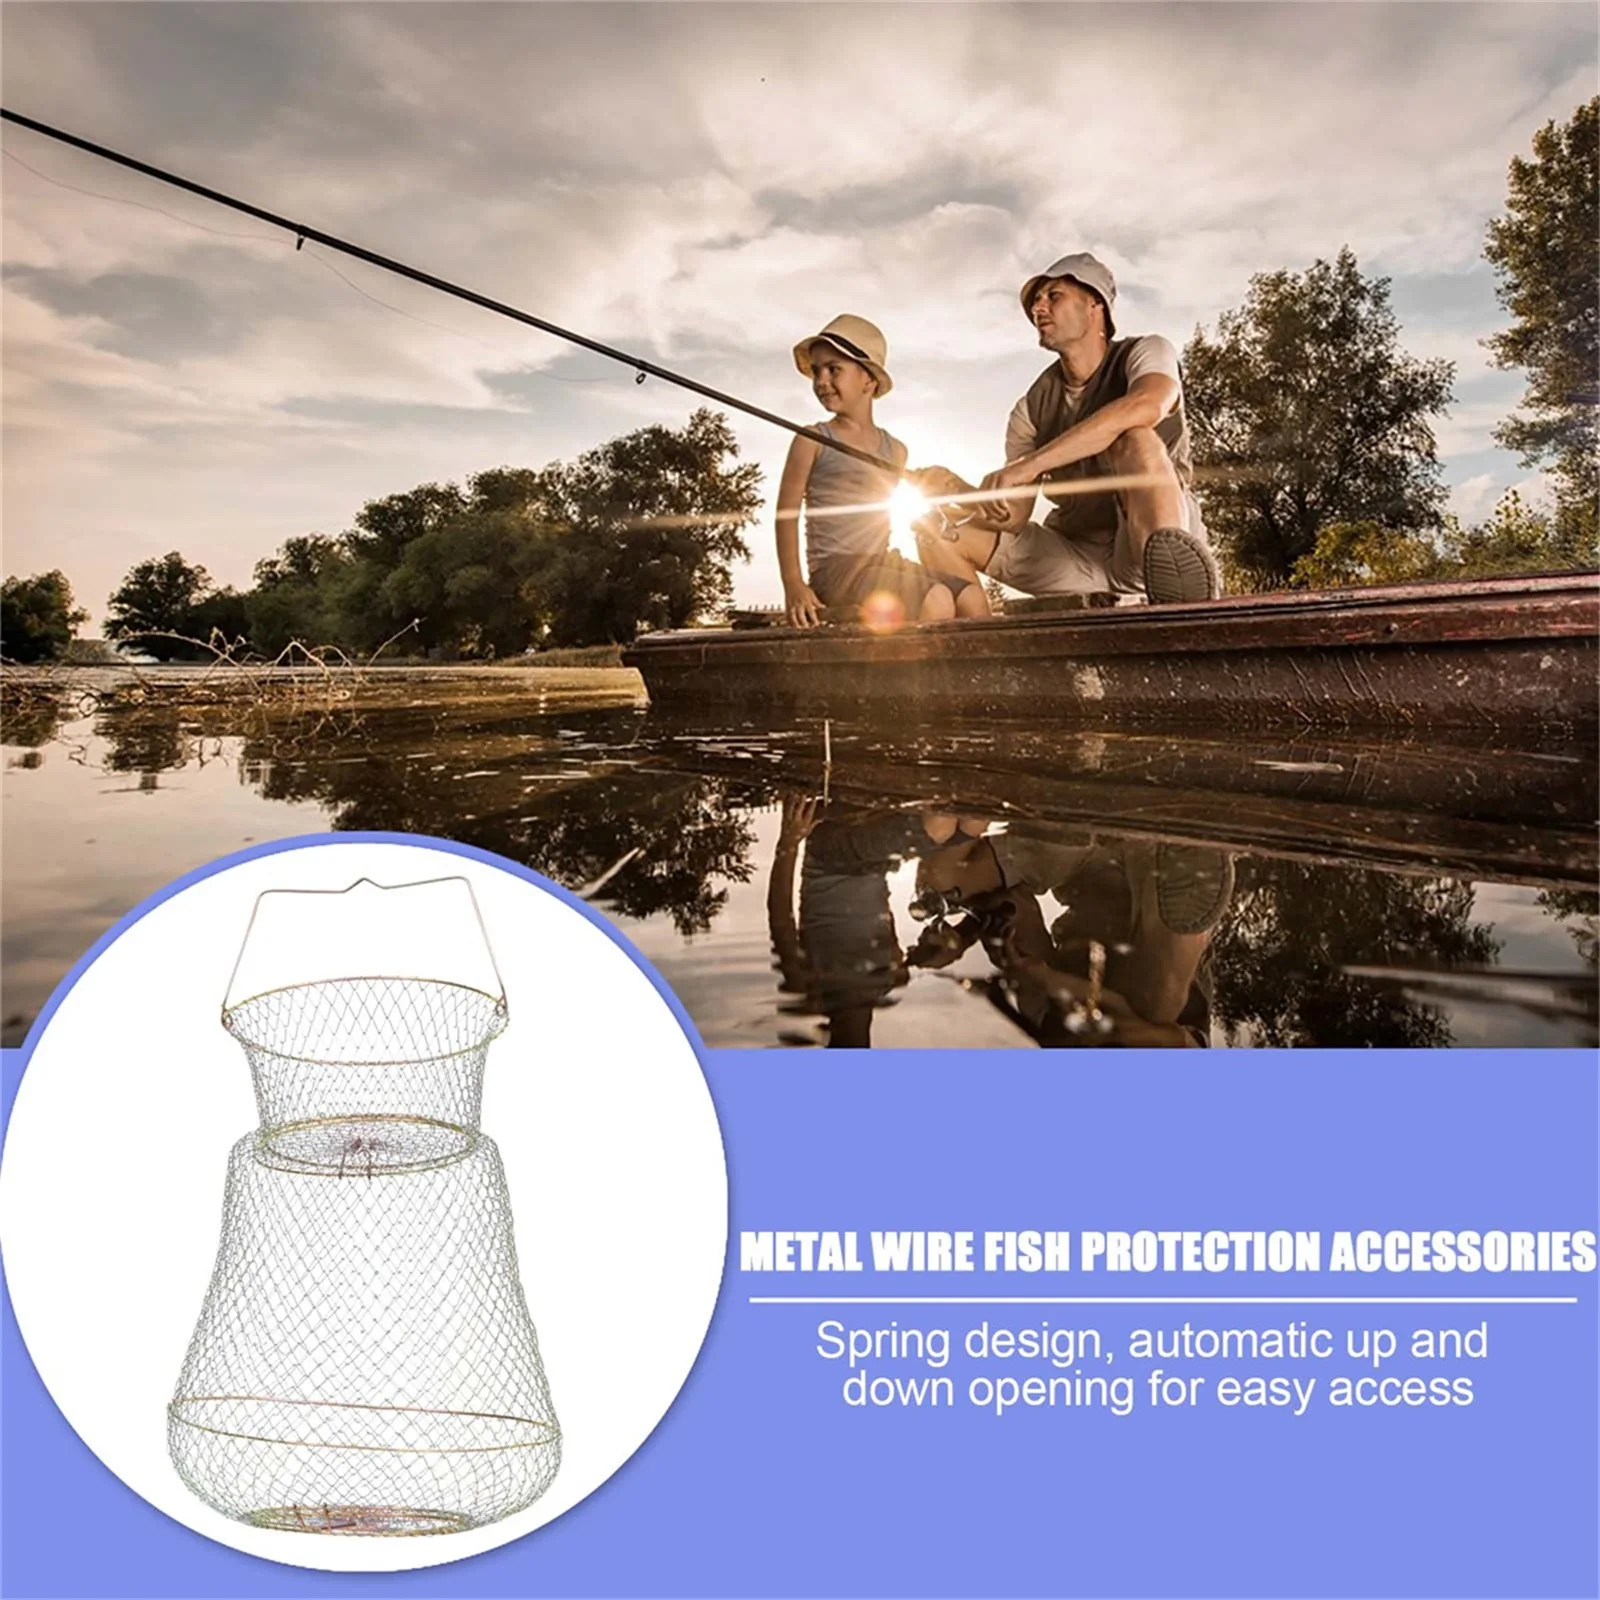 Crab Pot Fishing Accessory Iron Cage Trap Bling Accessories Net Outdoor Container Tools Basket Bag enlarge